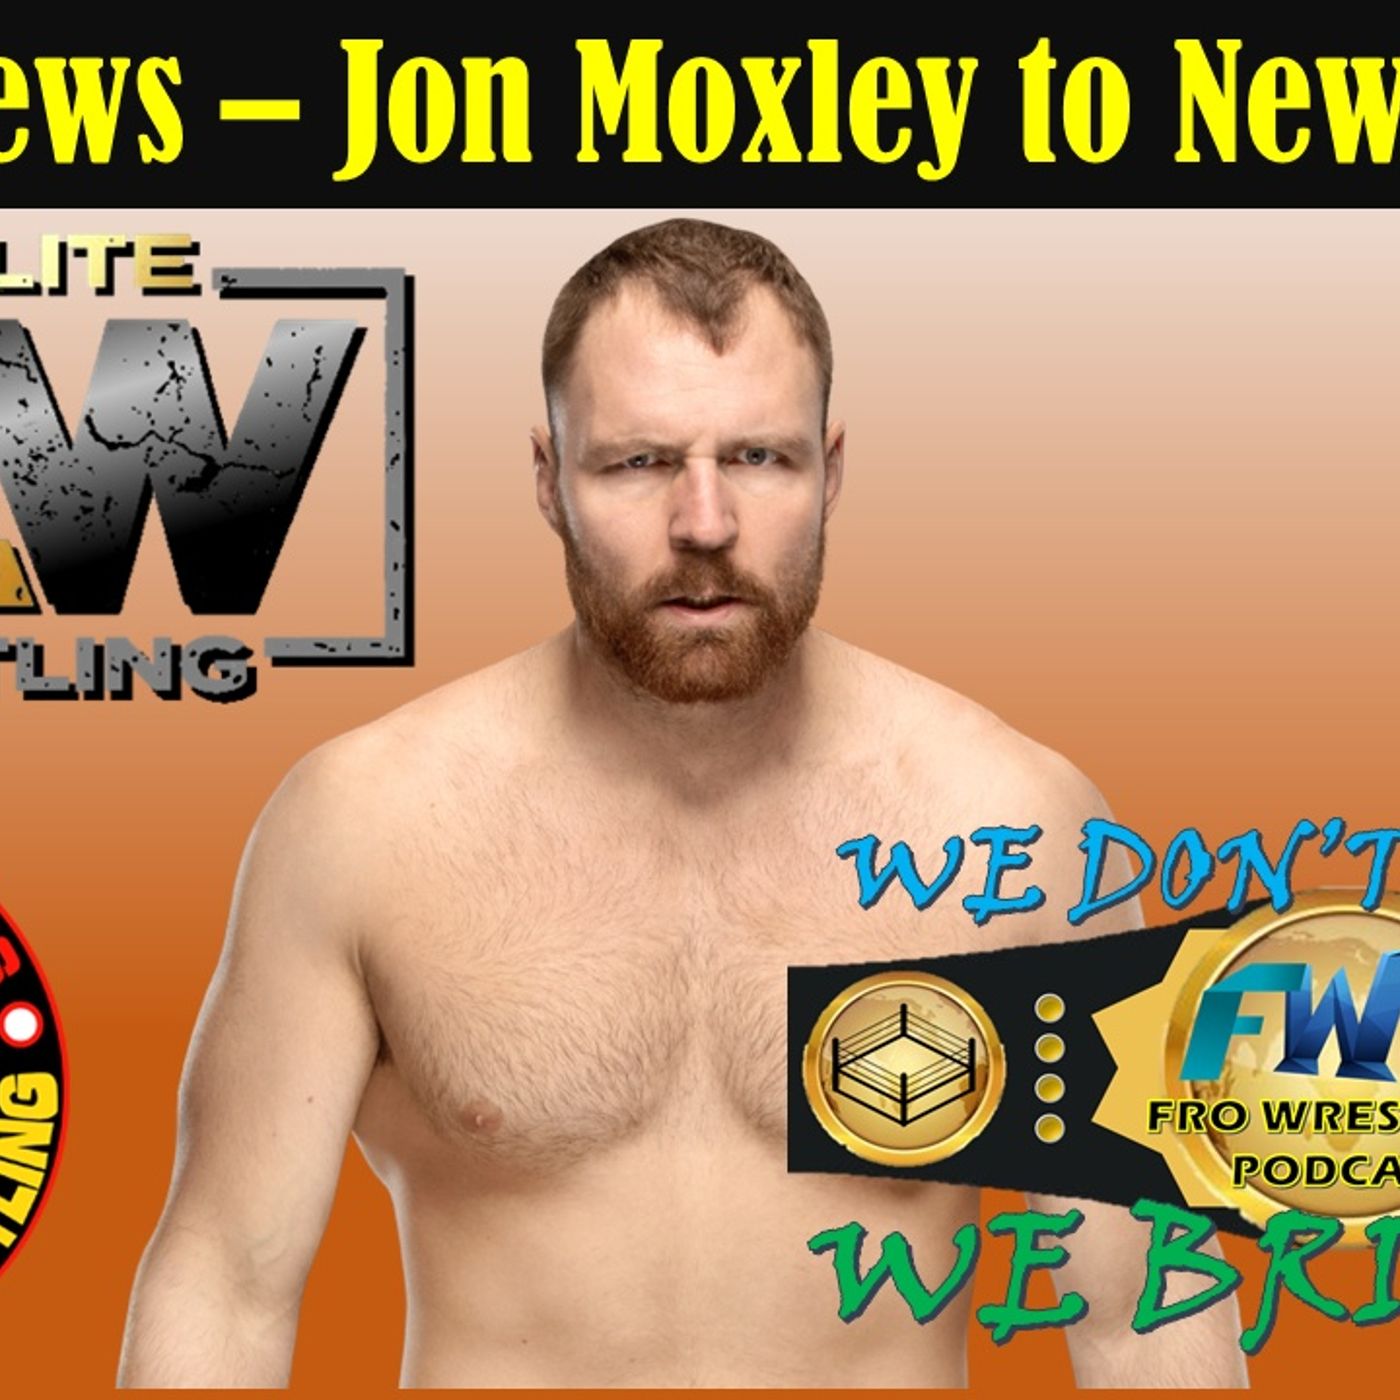 AEW News - Moxley to New Japan